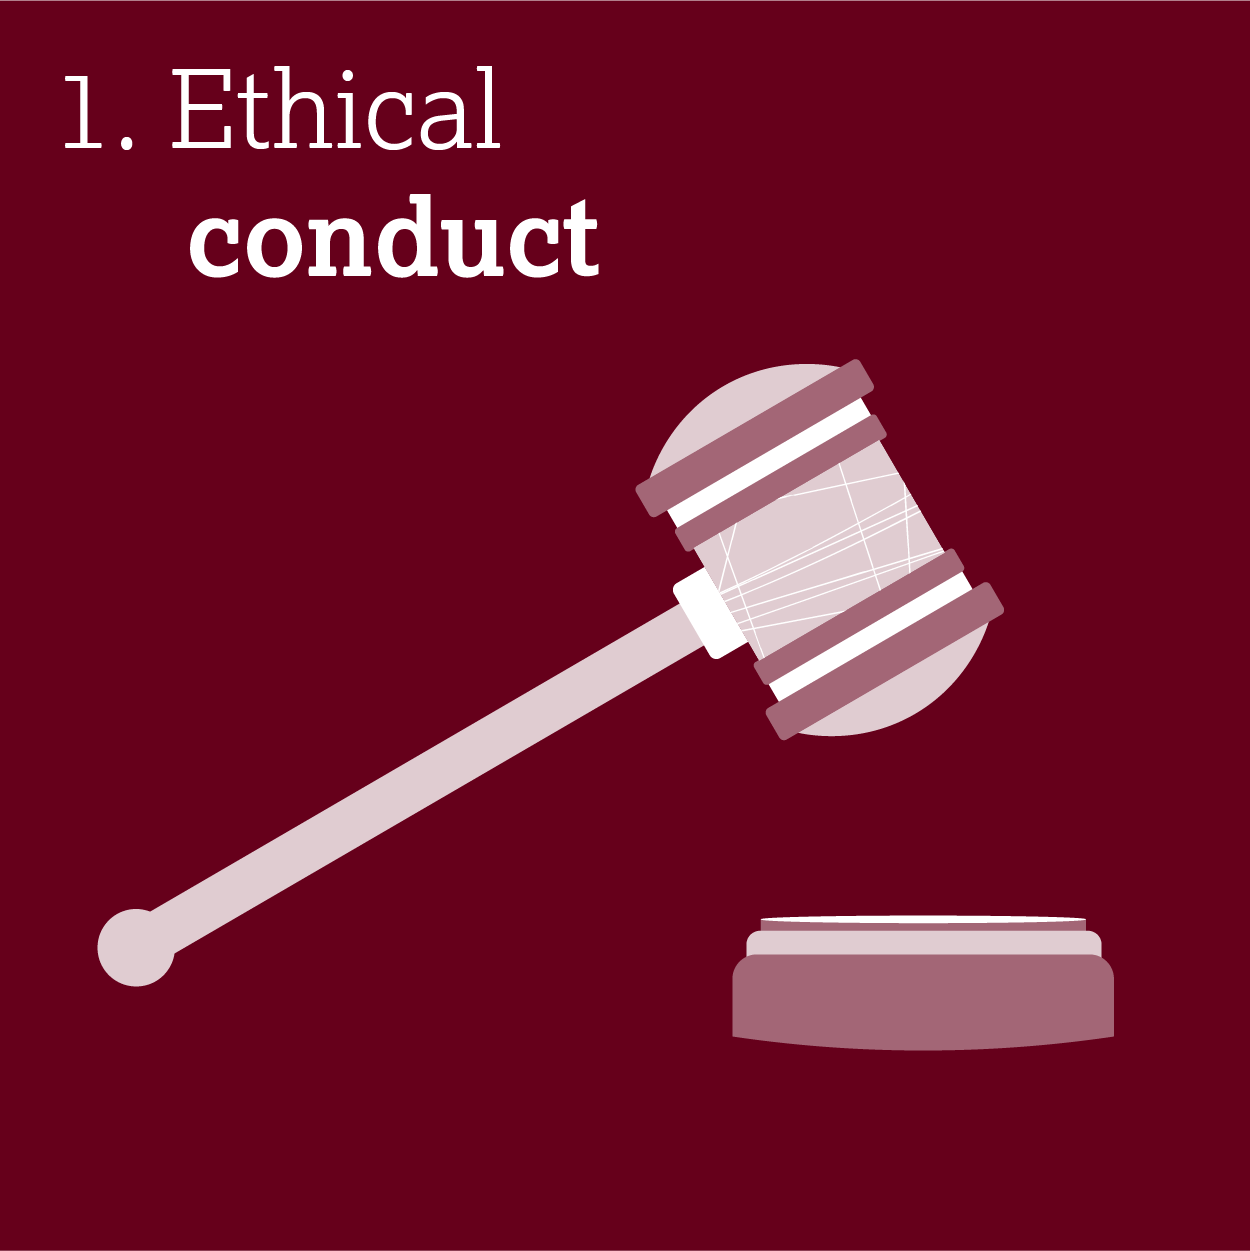 1. Ethical conduct